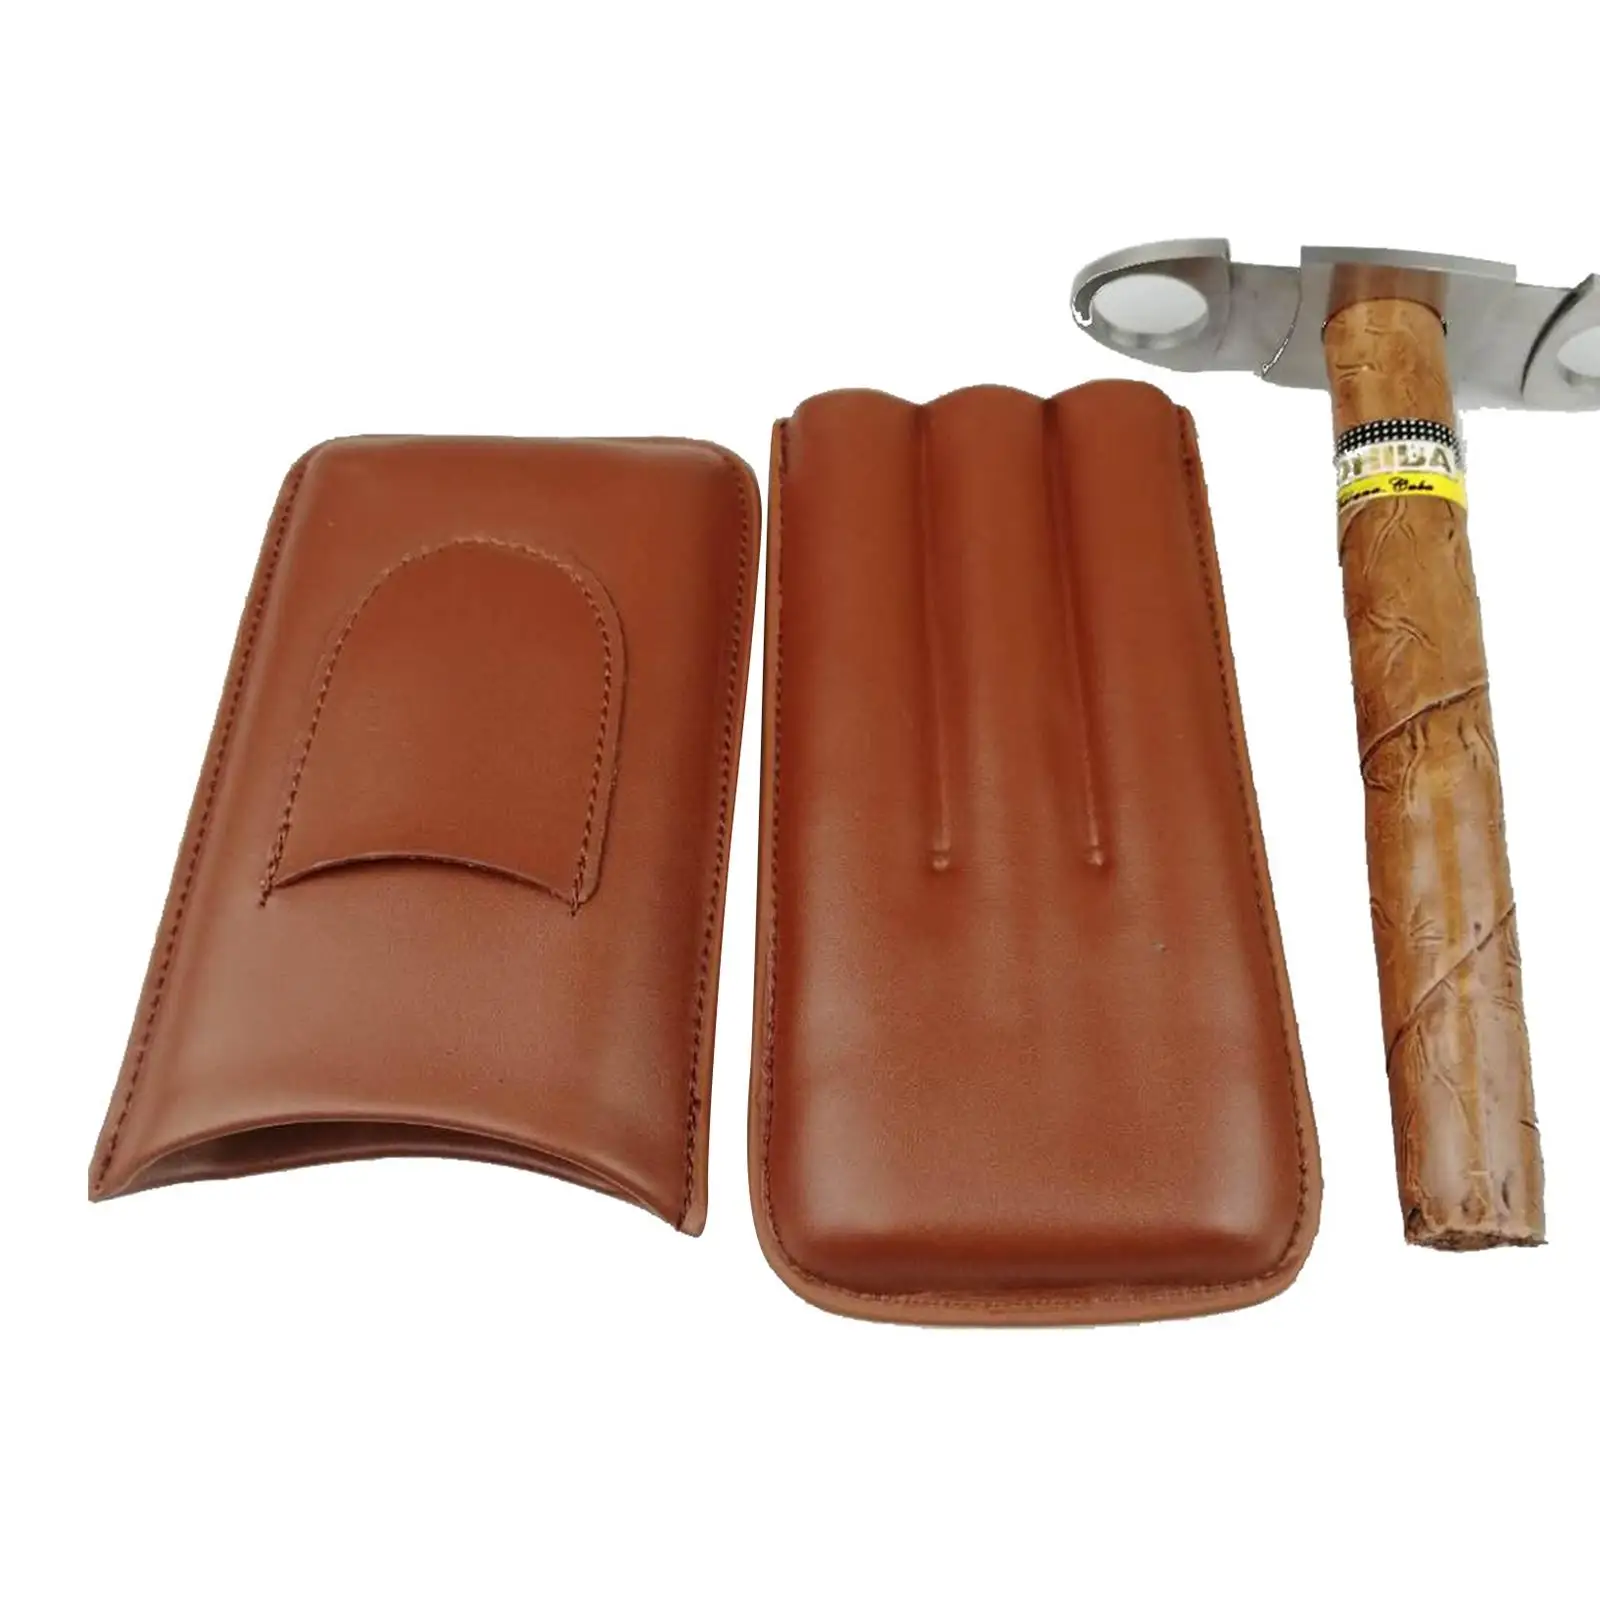 Leather Travel Cigar Case Portable 3 Tube Holder Humidor Cigars Accessories W/ Cigar Cutter Gift for Man